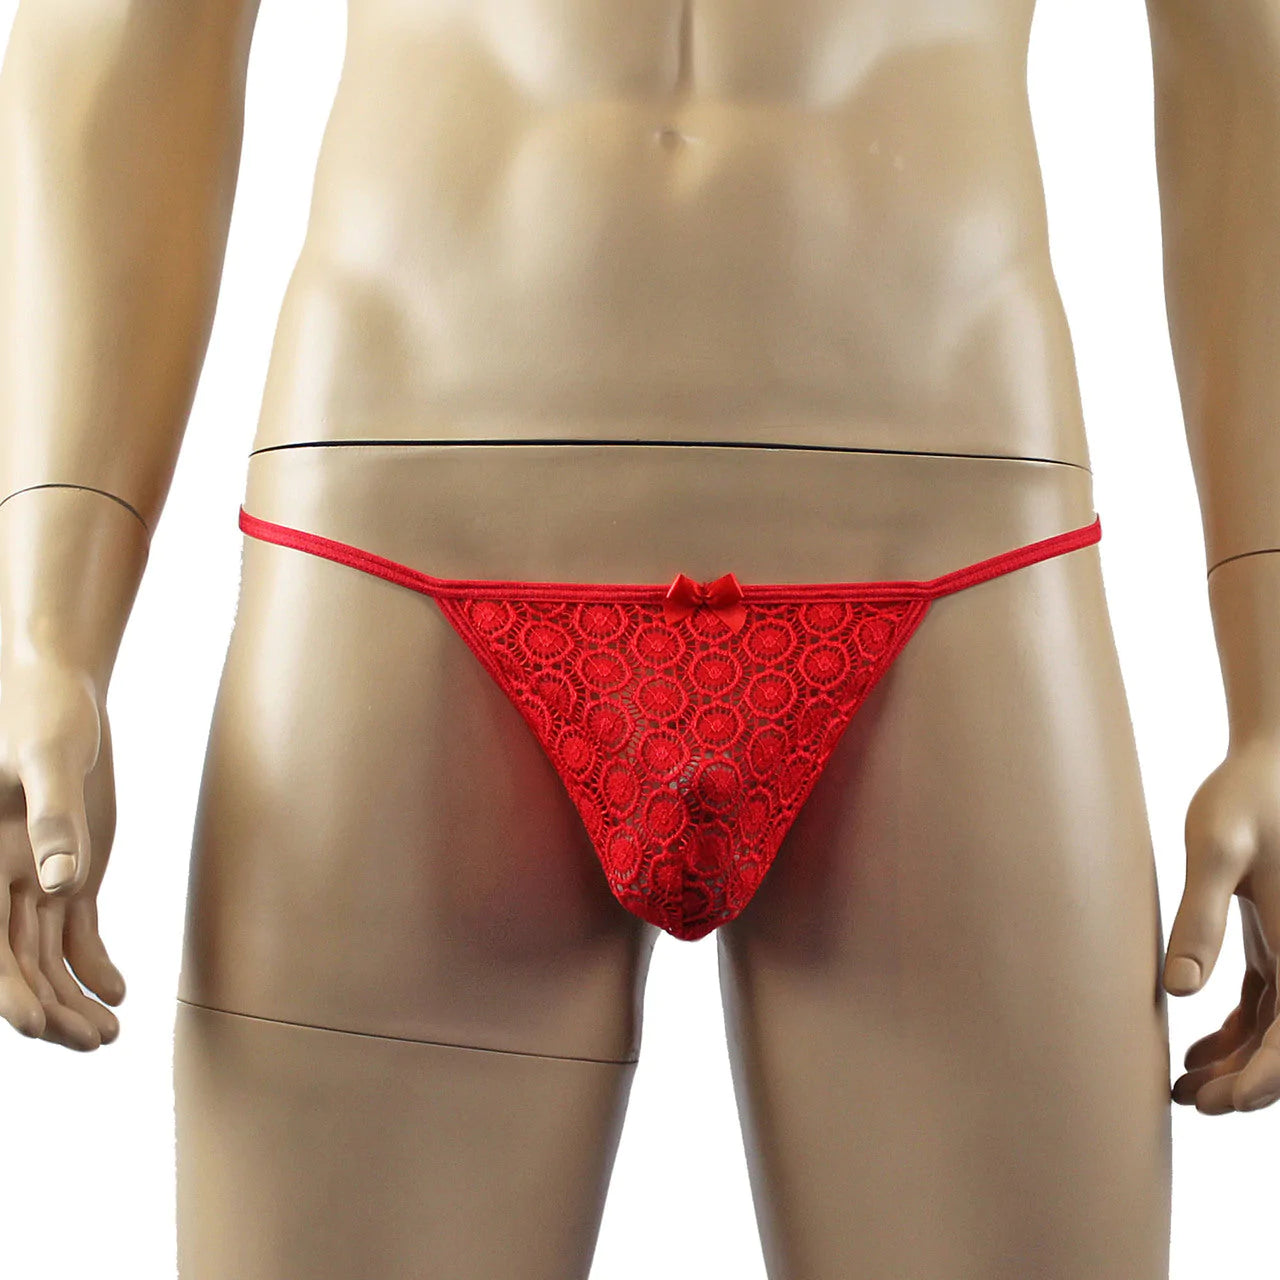 SALE - Mens Tease Circle Lace Pouch G string with Cute Bow Front Red